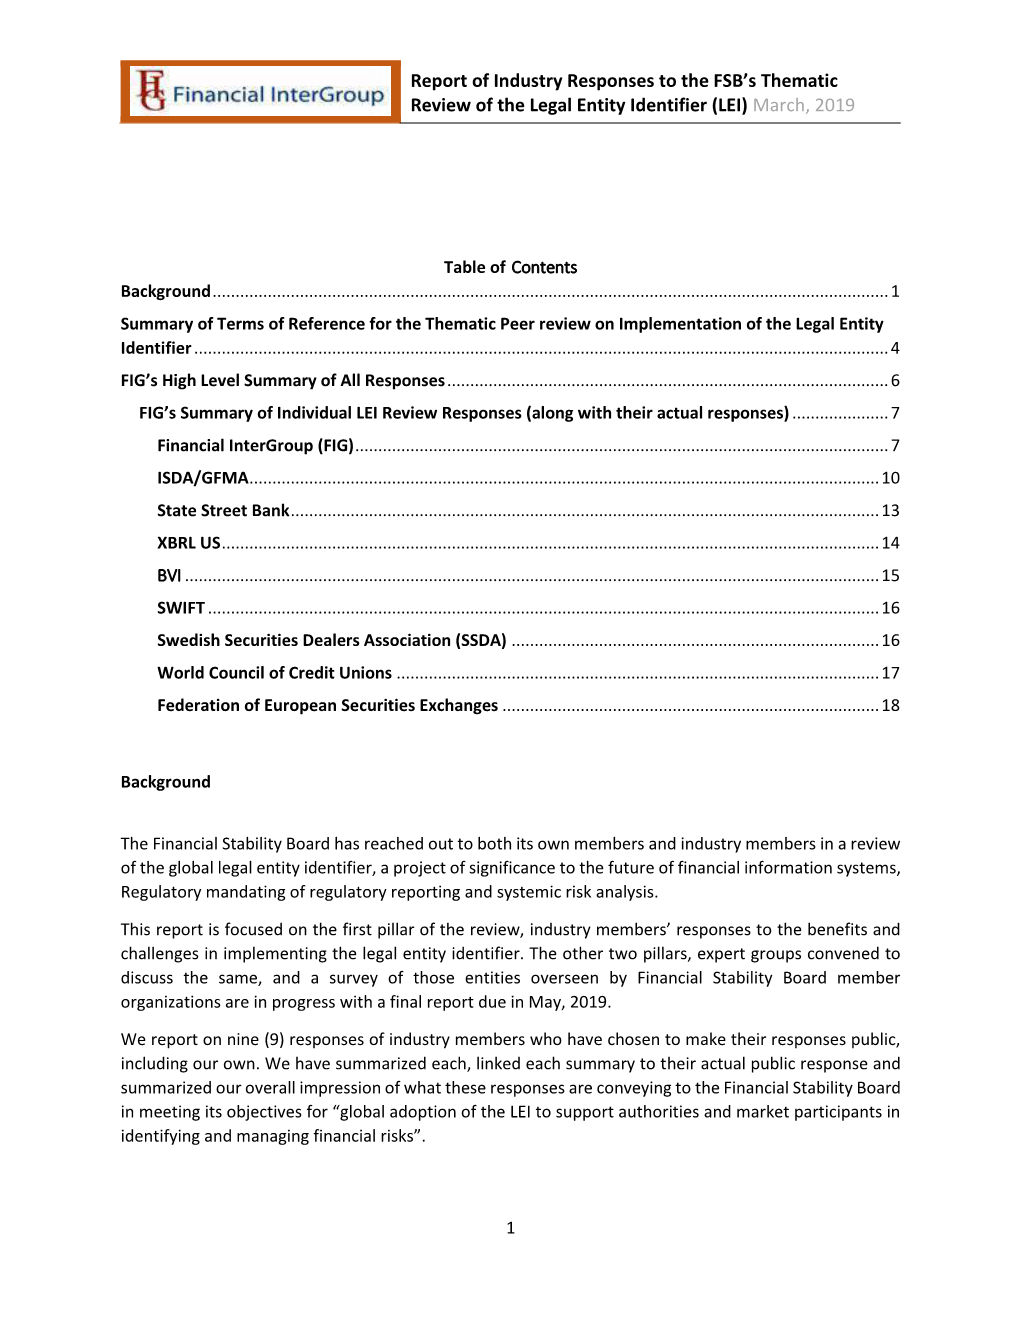 Report of Industry Responses to the FSB's Thematic Review of the Legal